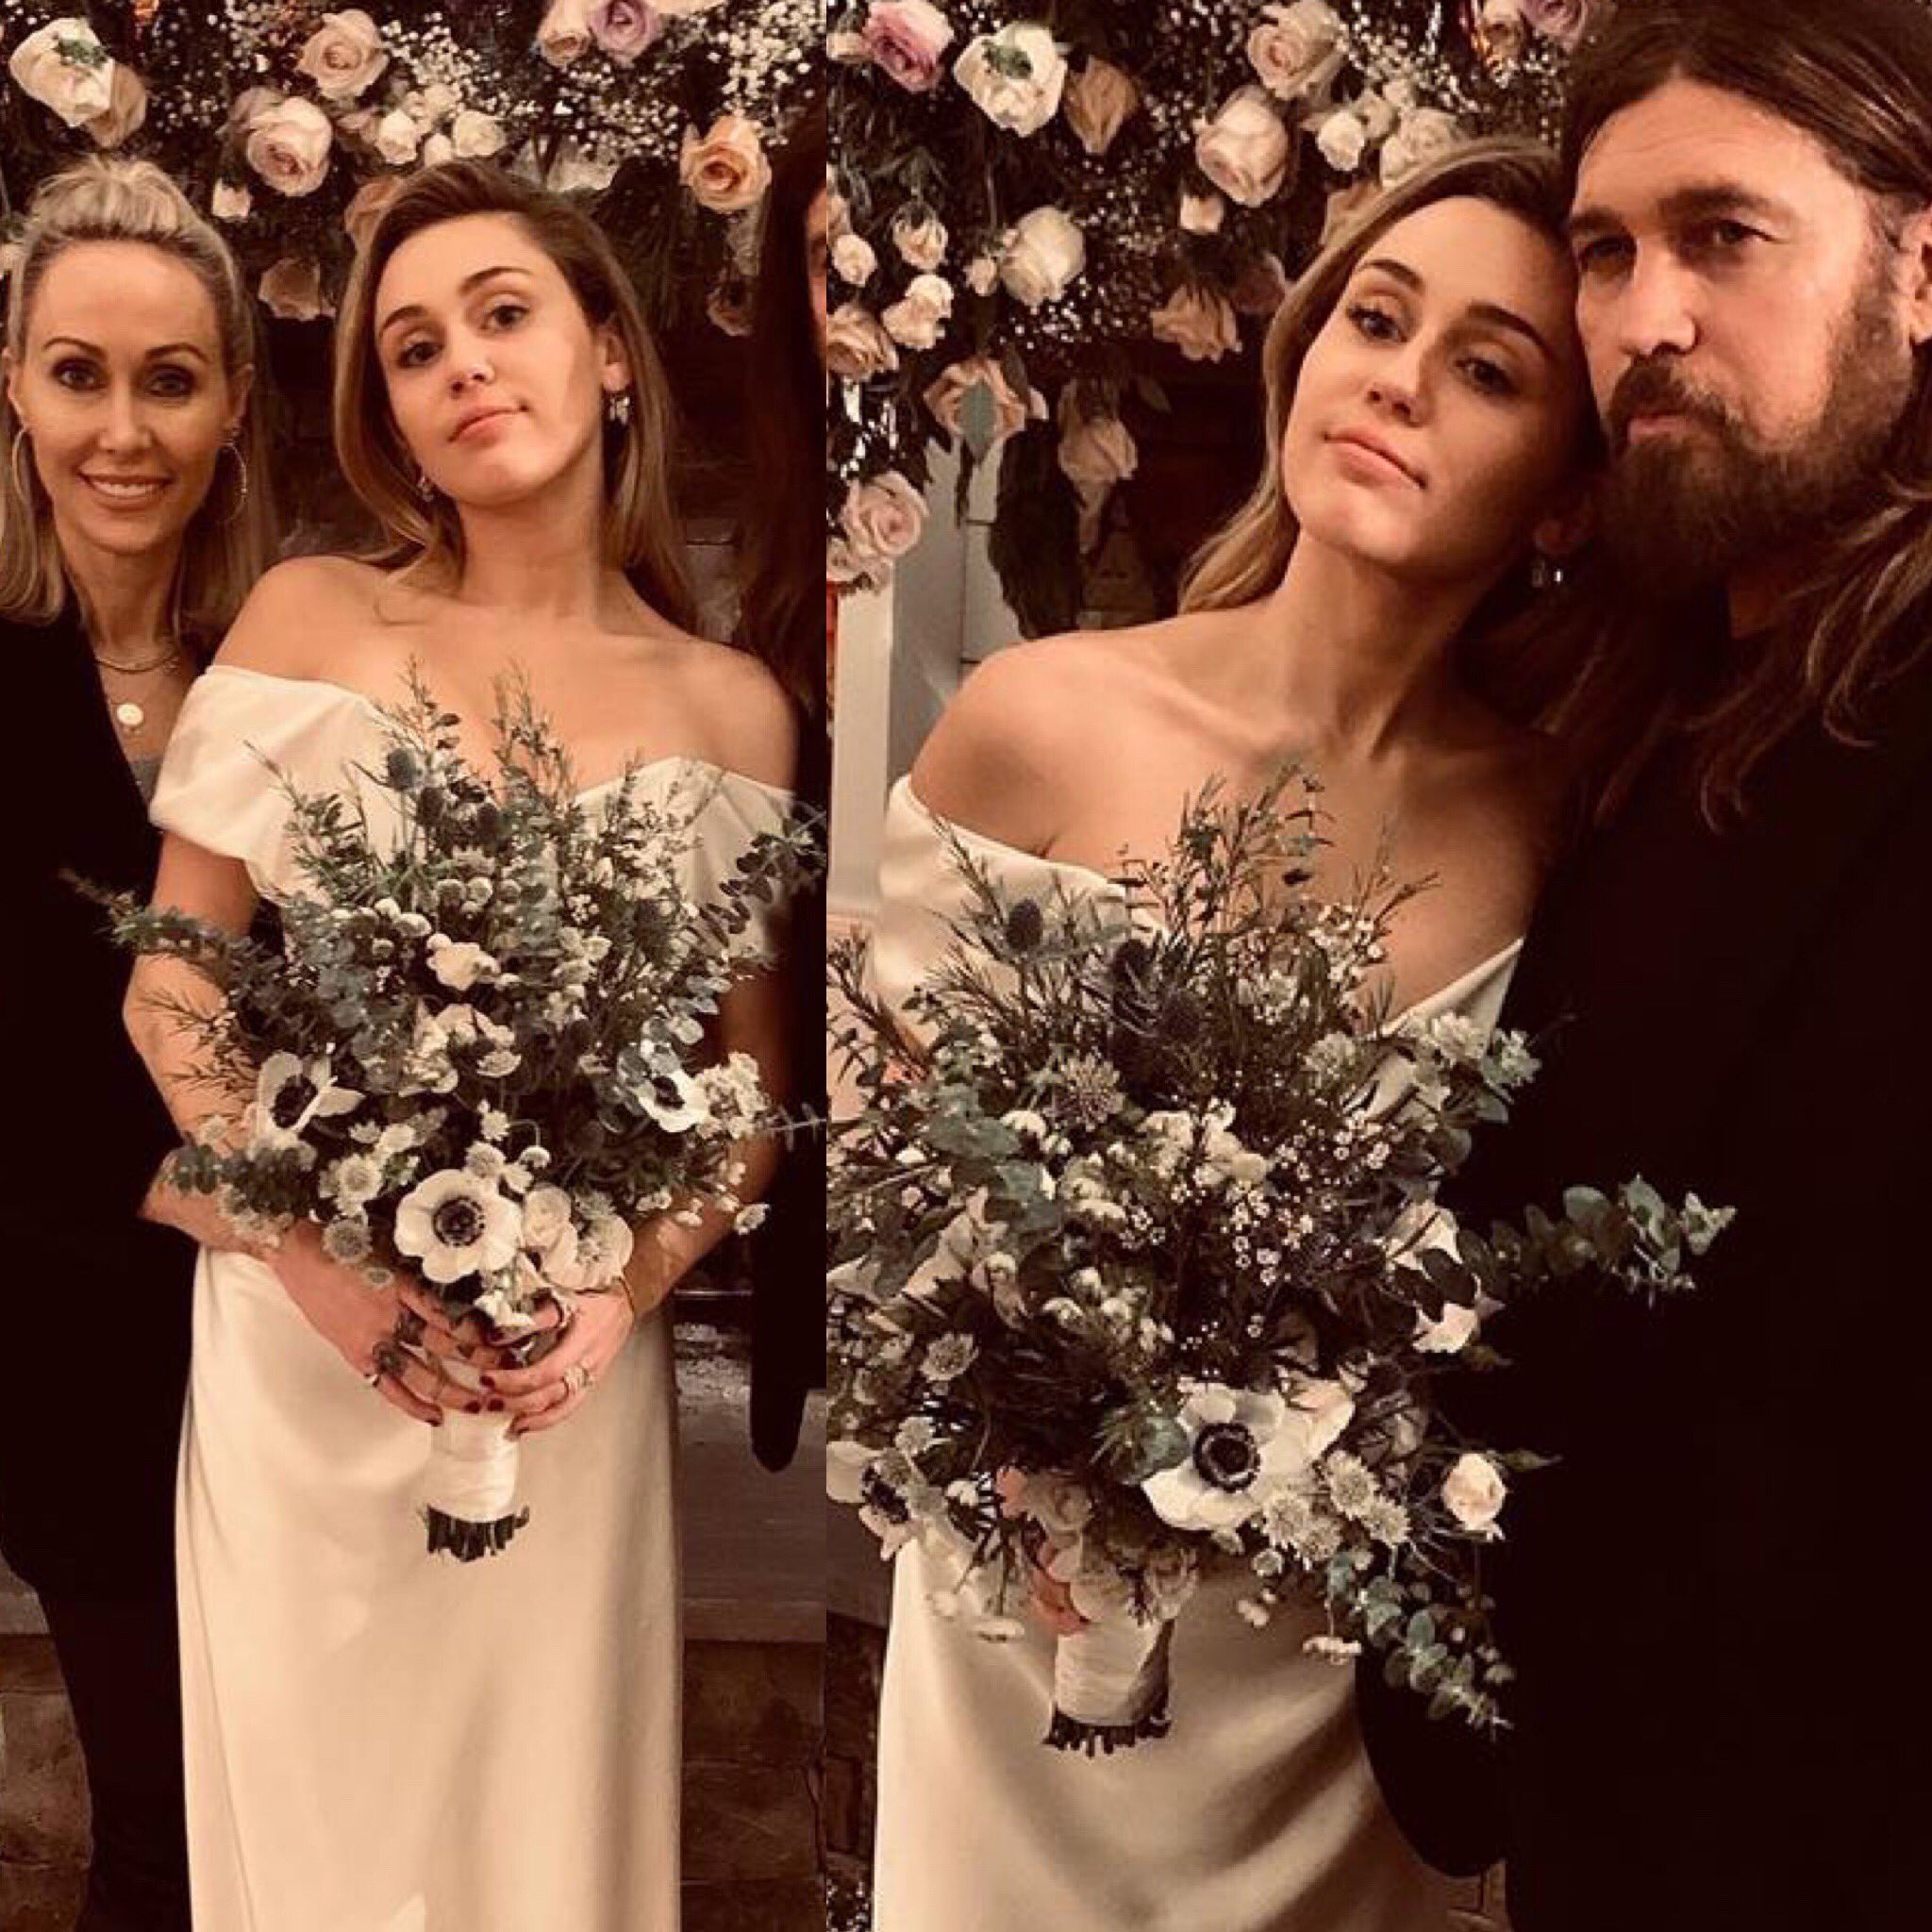 Look: Miley Cyrus kisses her dog in new wedding photos - UPI.com